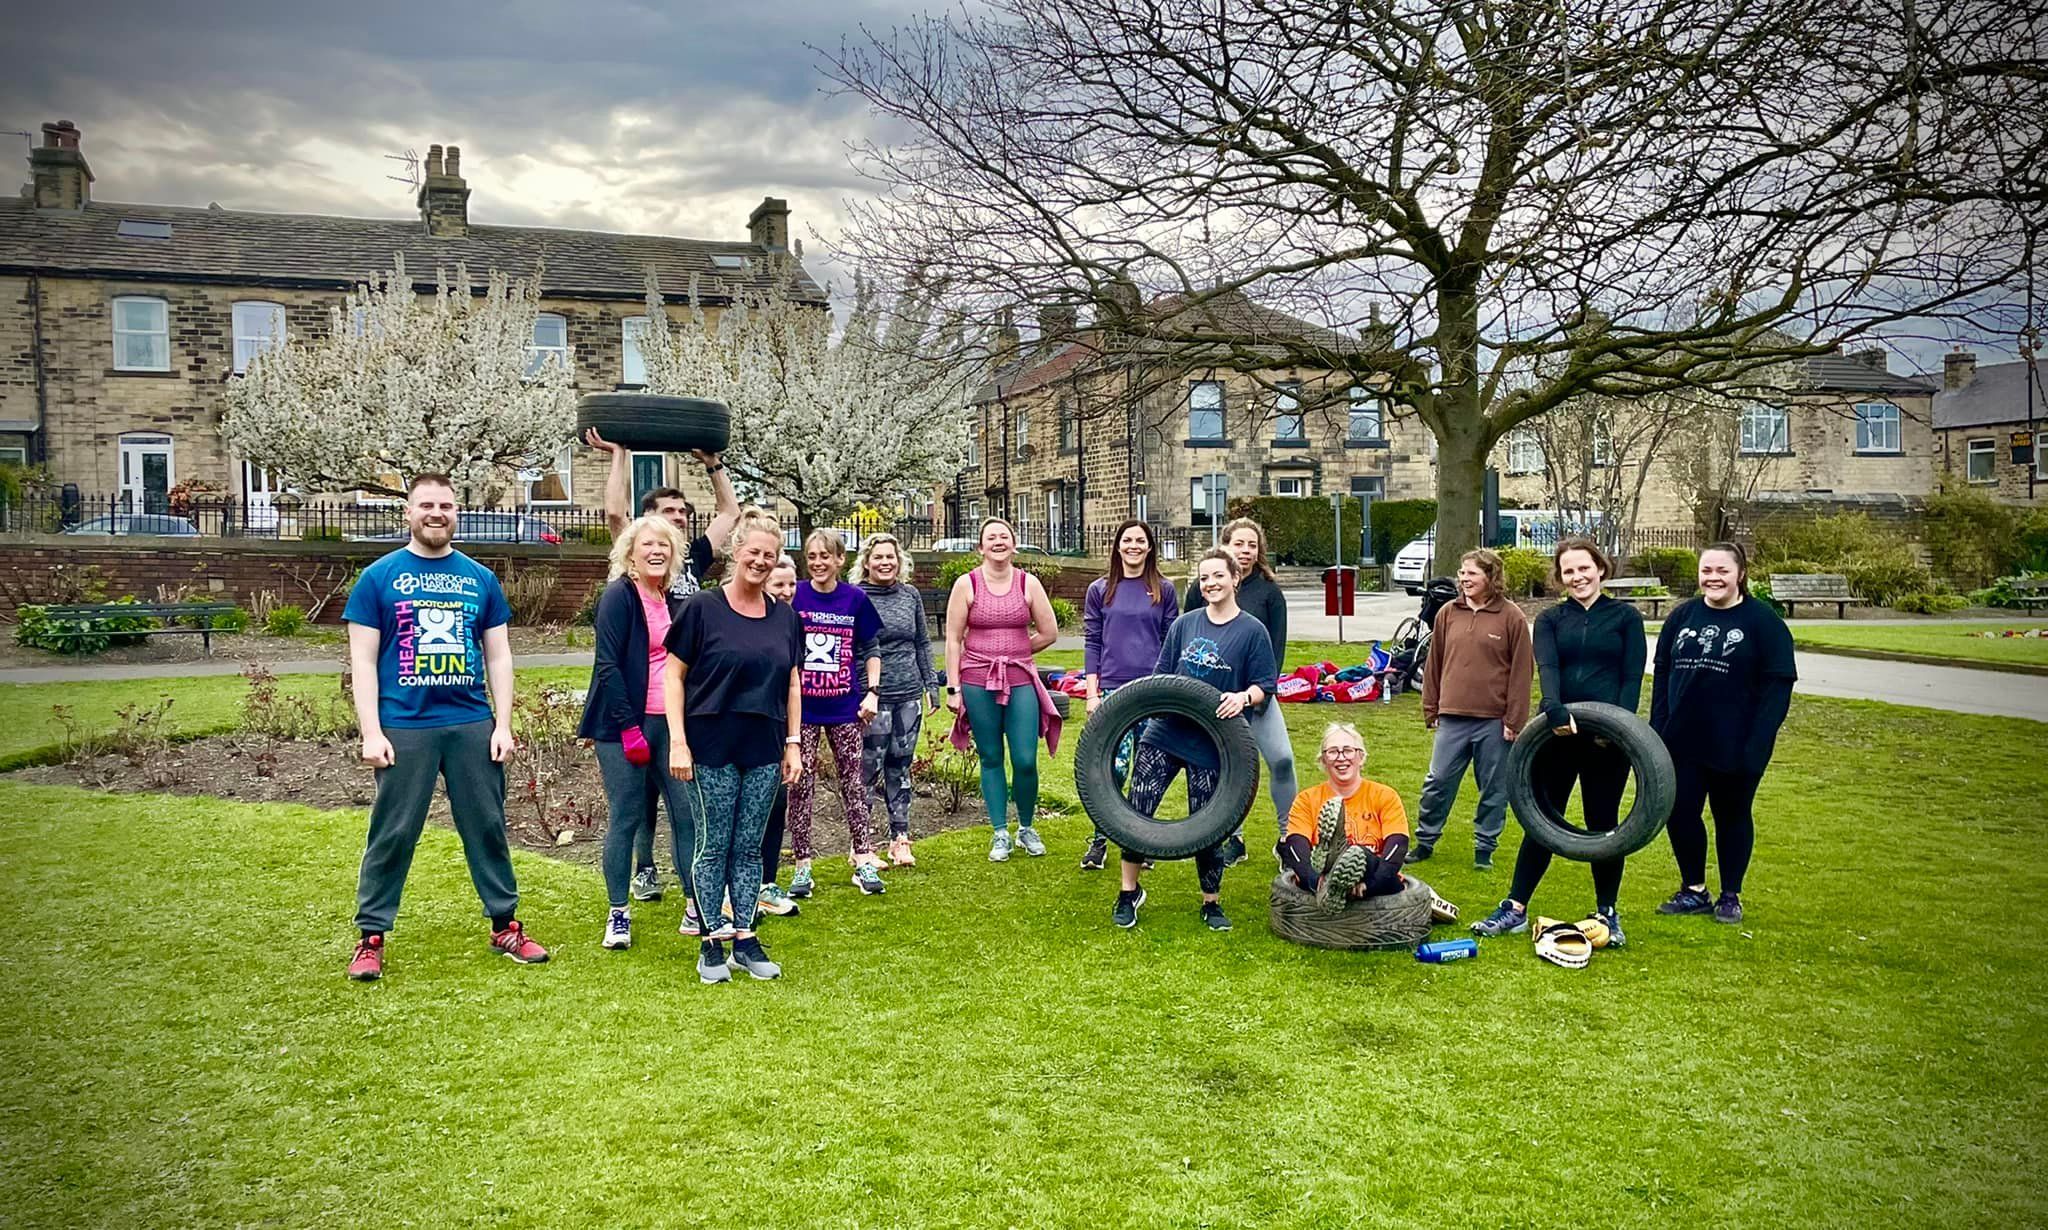 What are the benefits of exercising in a group outdoors? 's Image